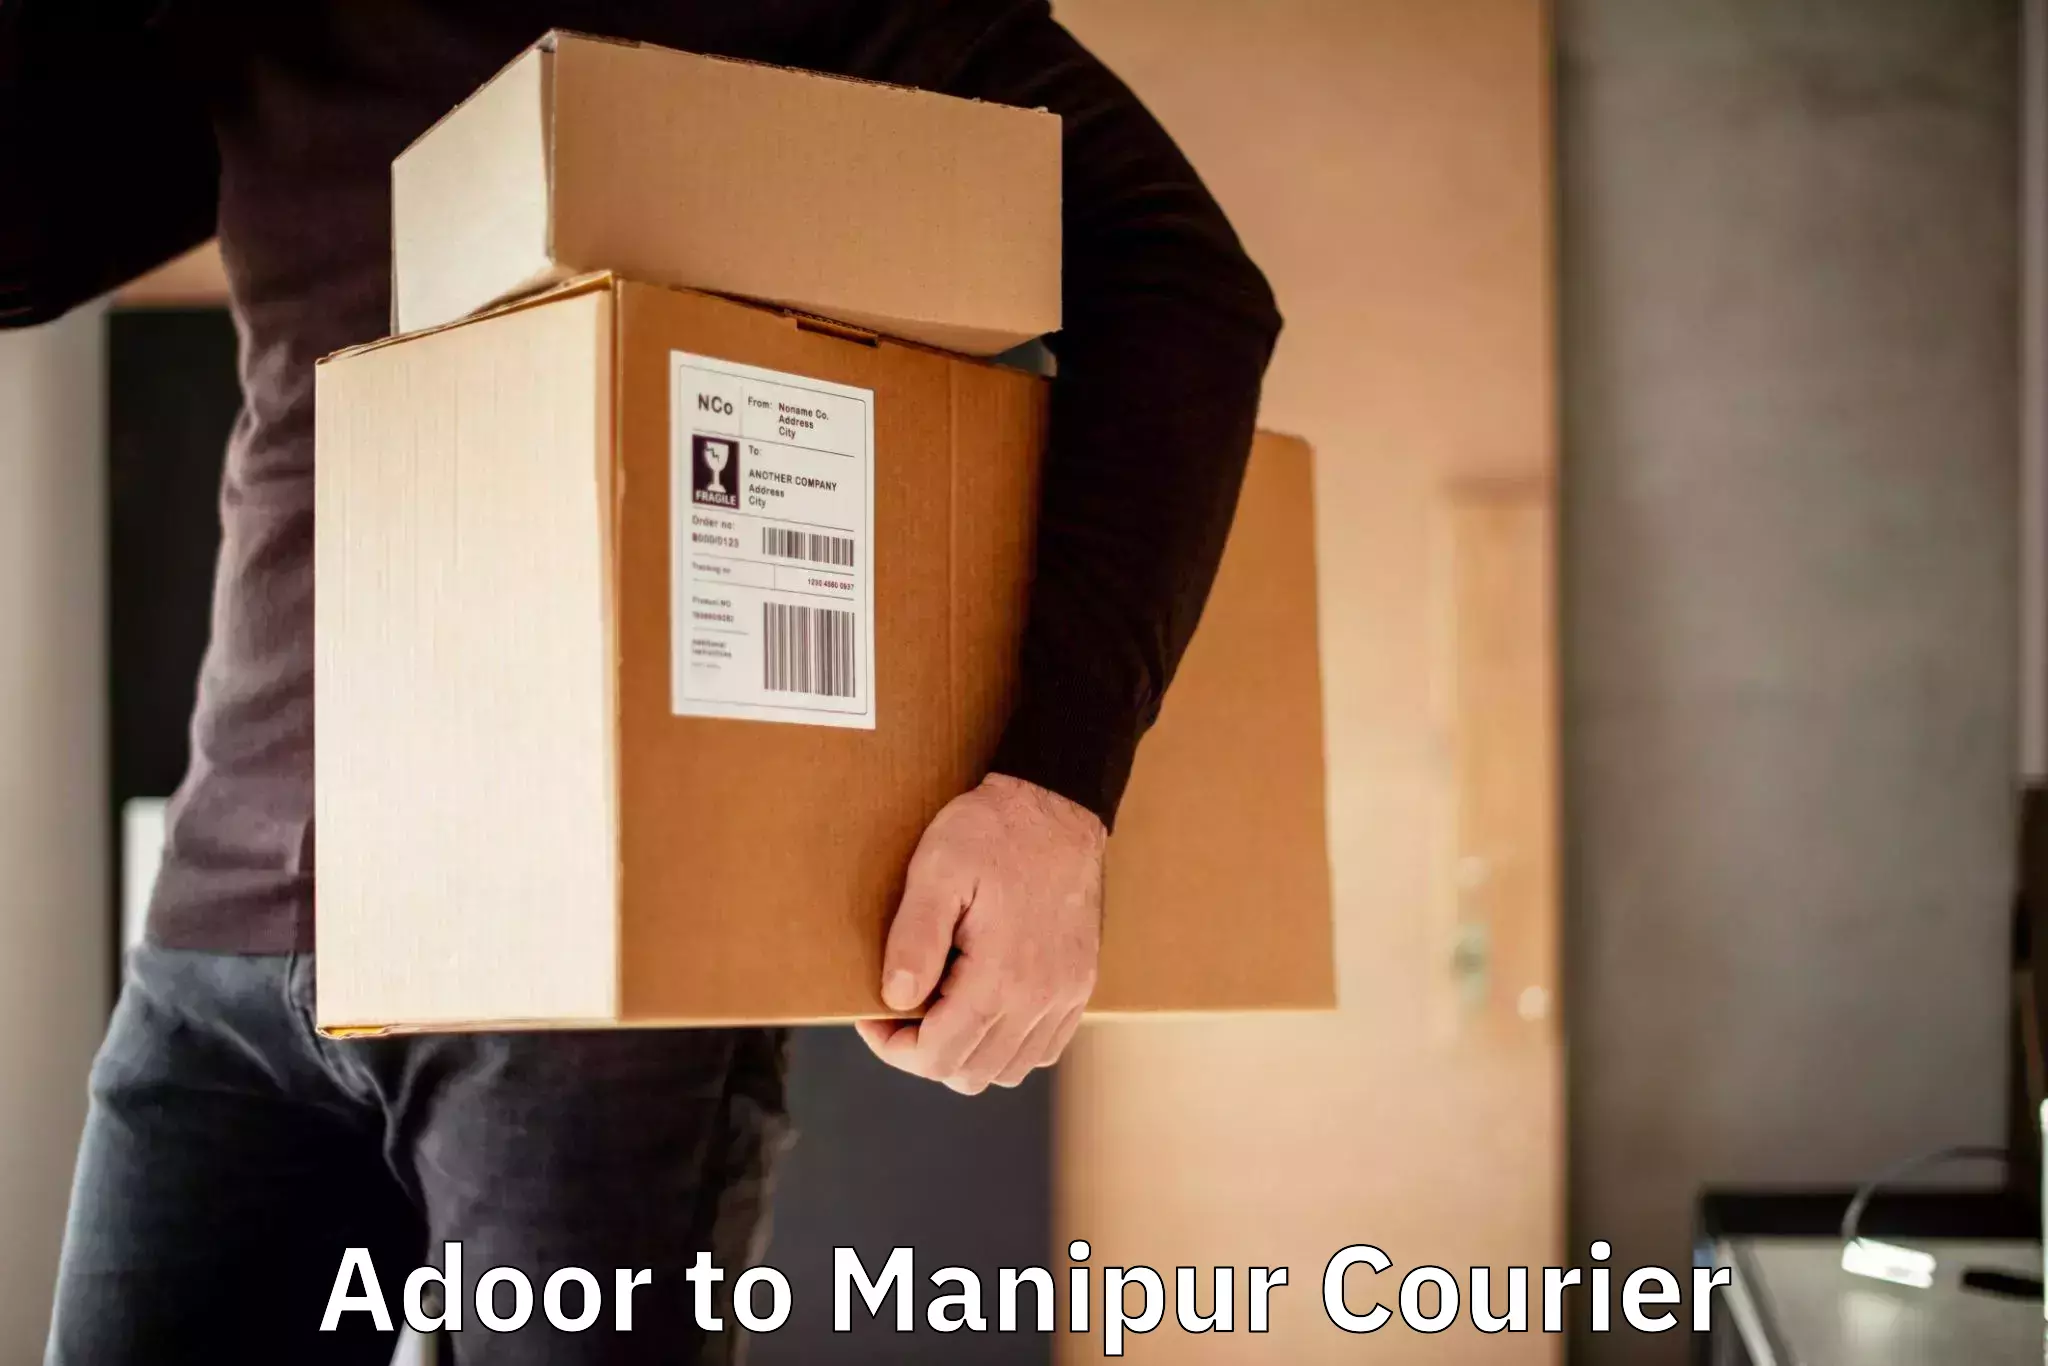 Overnight delivery services Adoor to Manipur